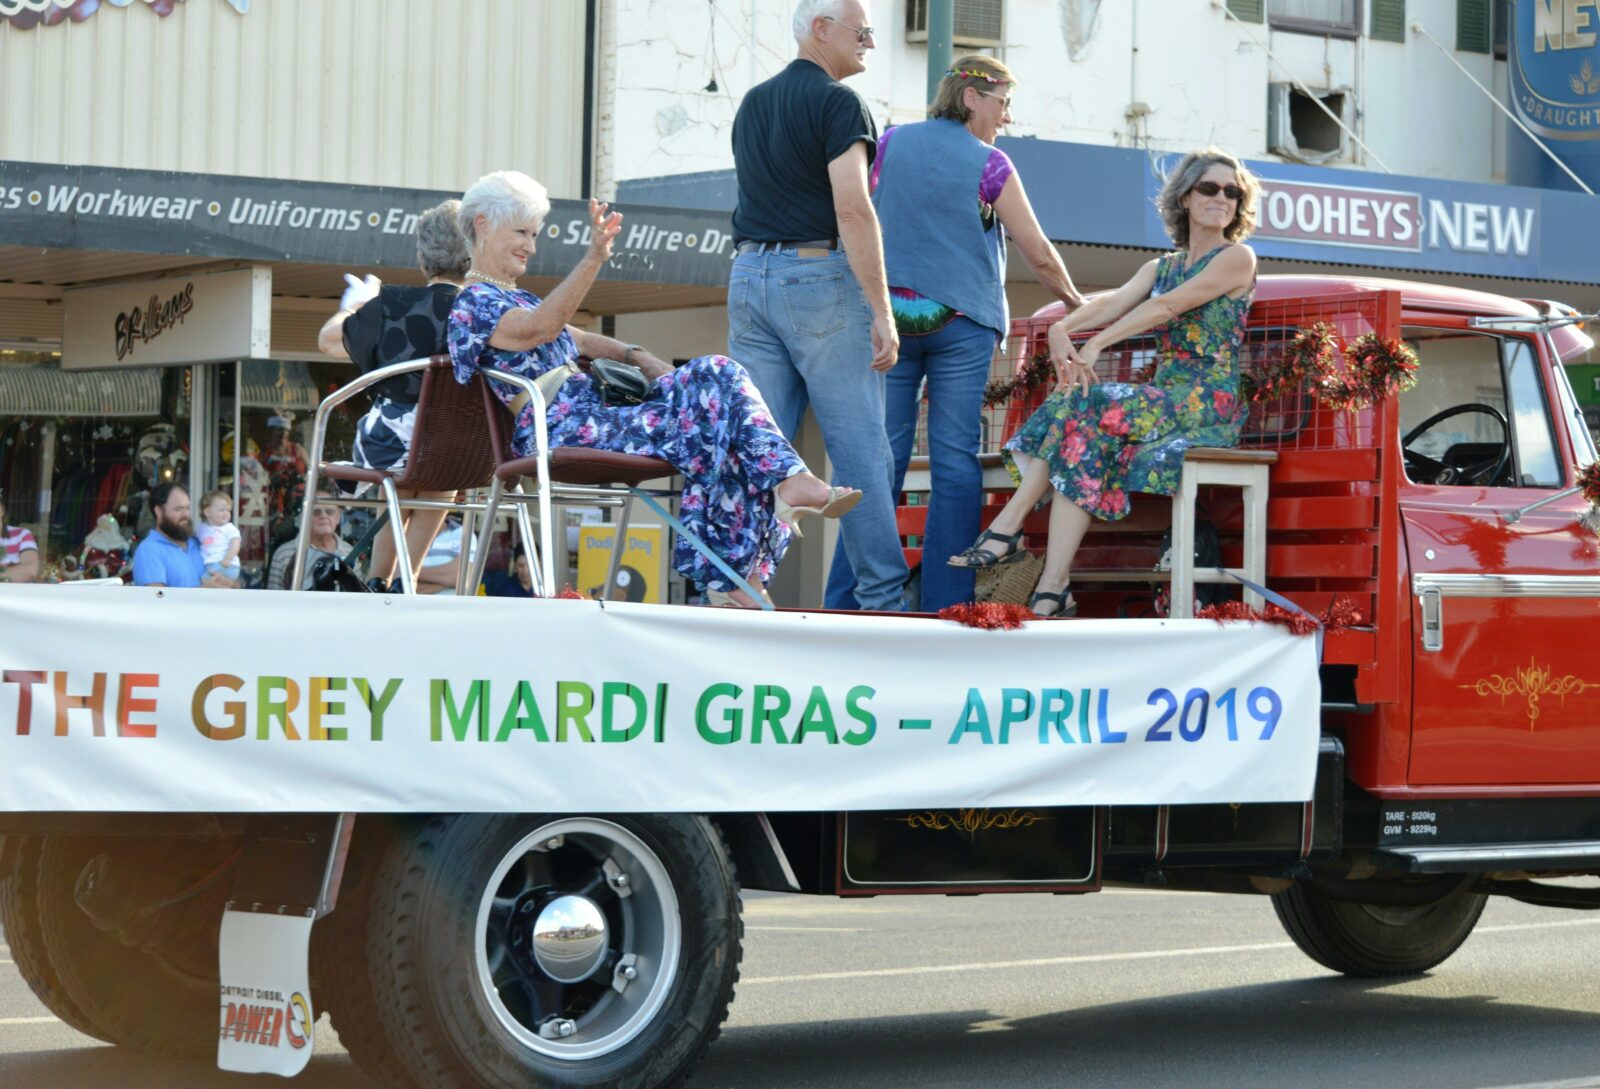 People in vintage costume on a truck for a parade in Cobar